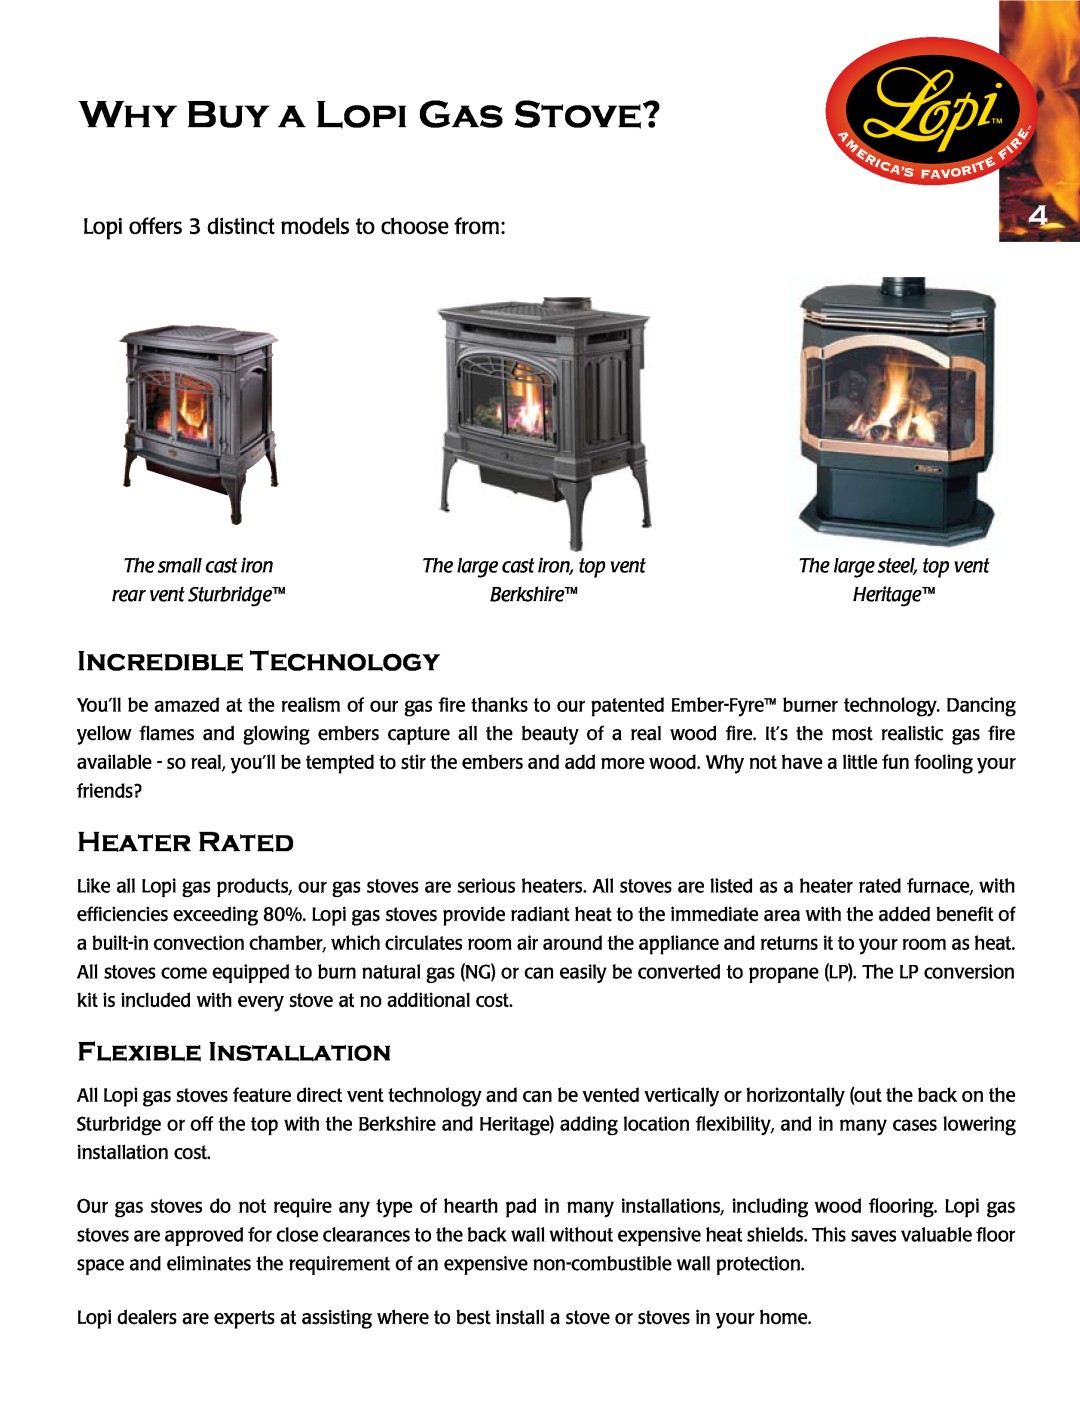 Lopi Gas Stove And Fireplace manual Why Buy A Lopi Gas Stove?, Incredible Technology, Heater Rated, Flexible Installation 